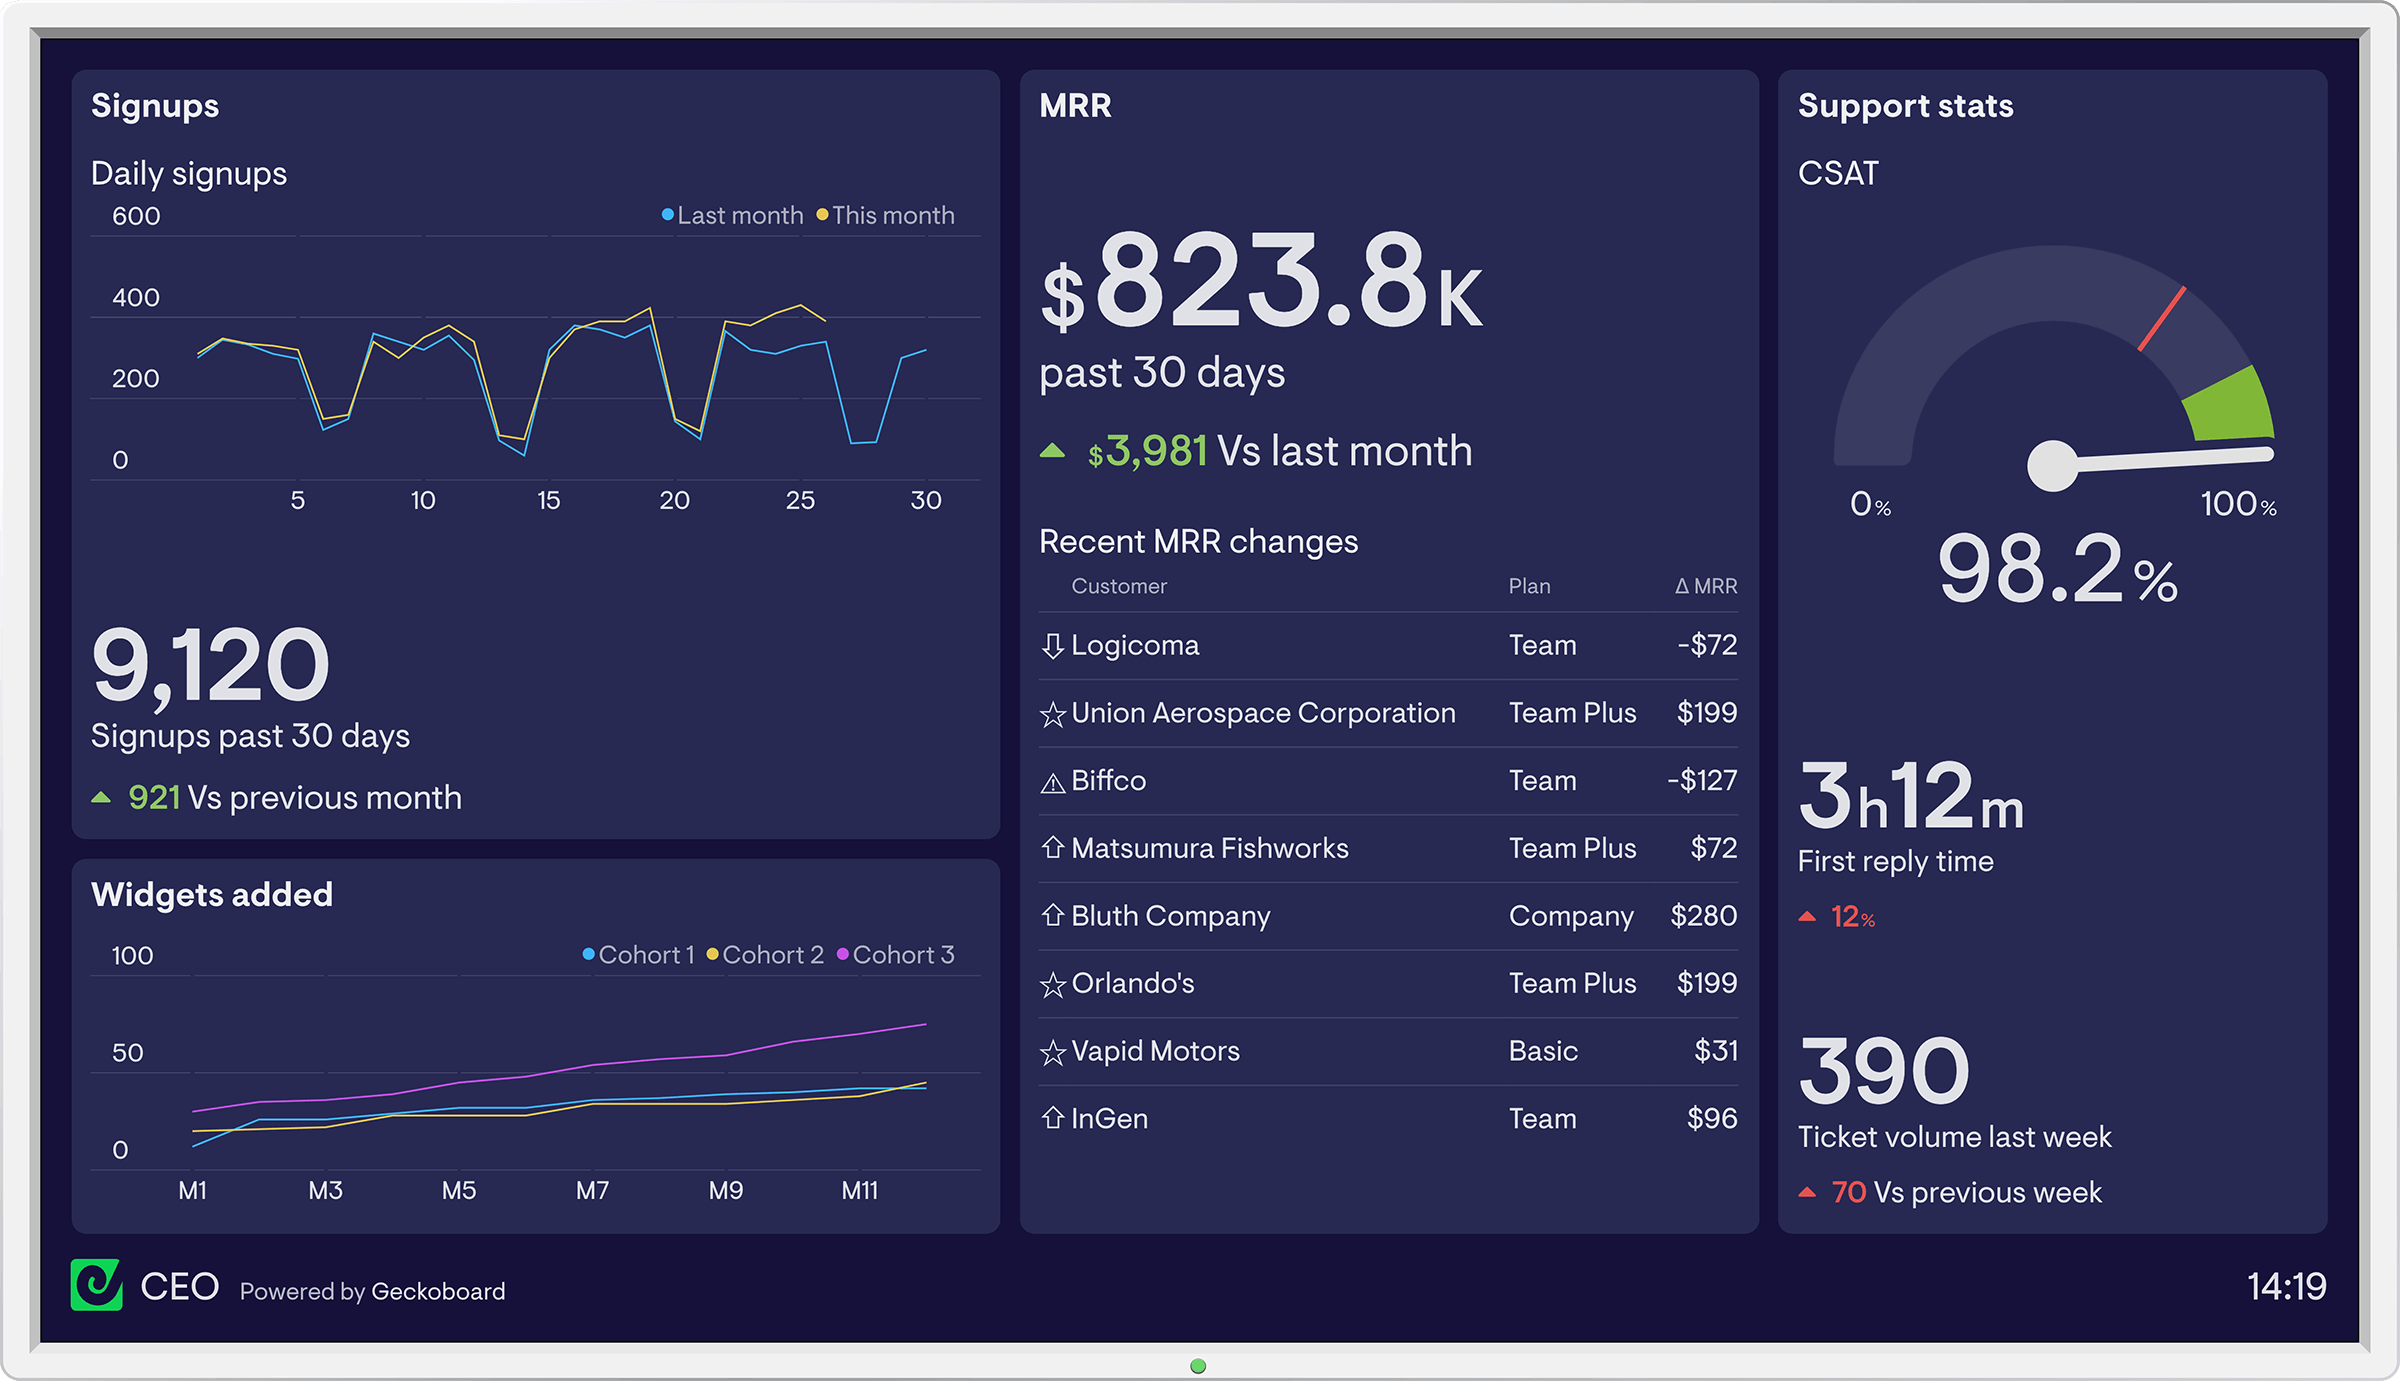 Easy to build dashboards for your data | Geckoboard